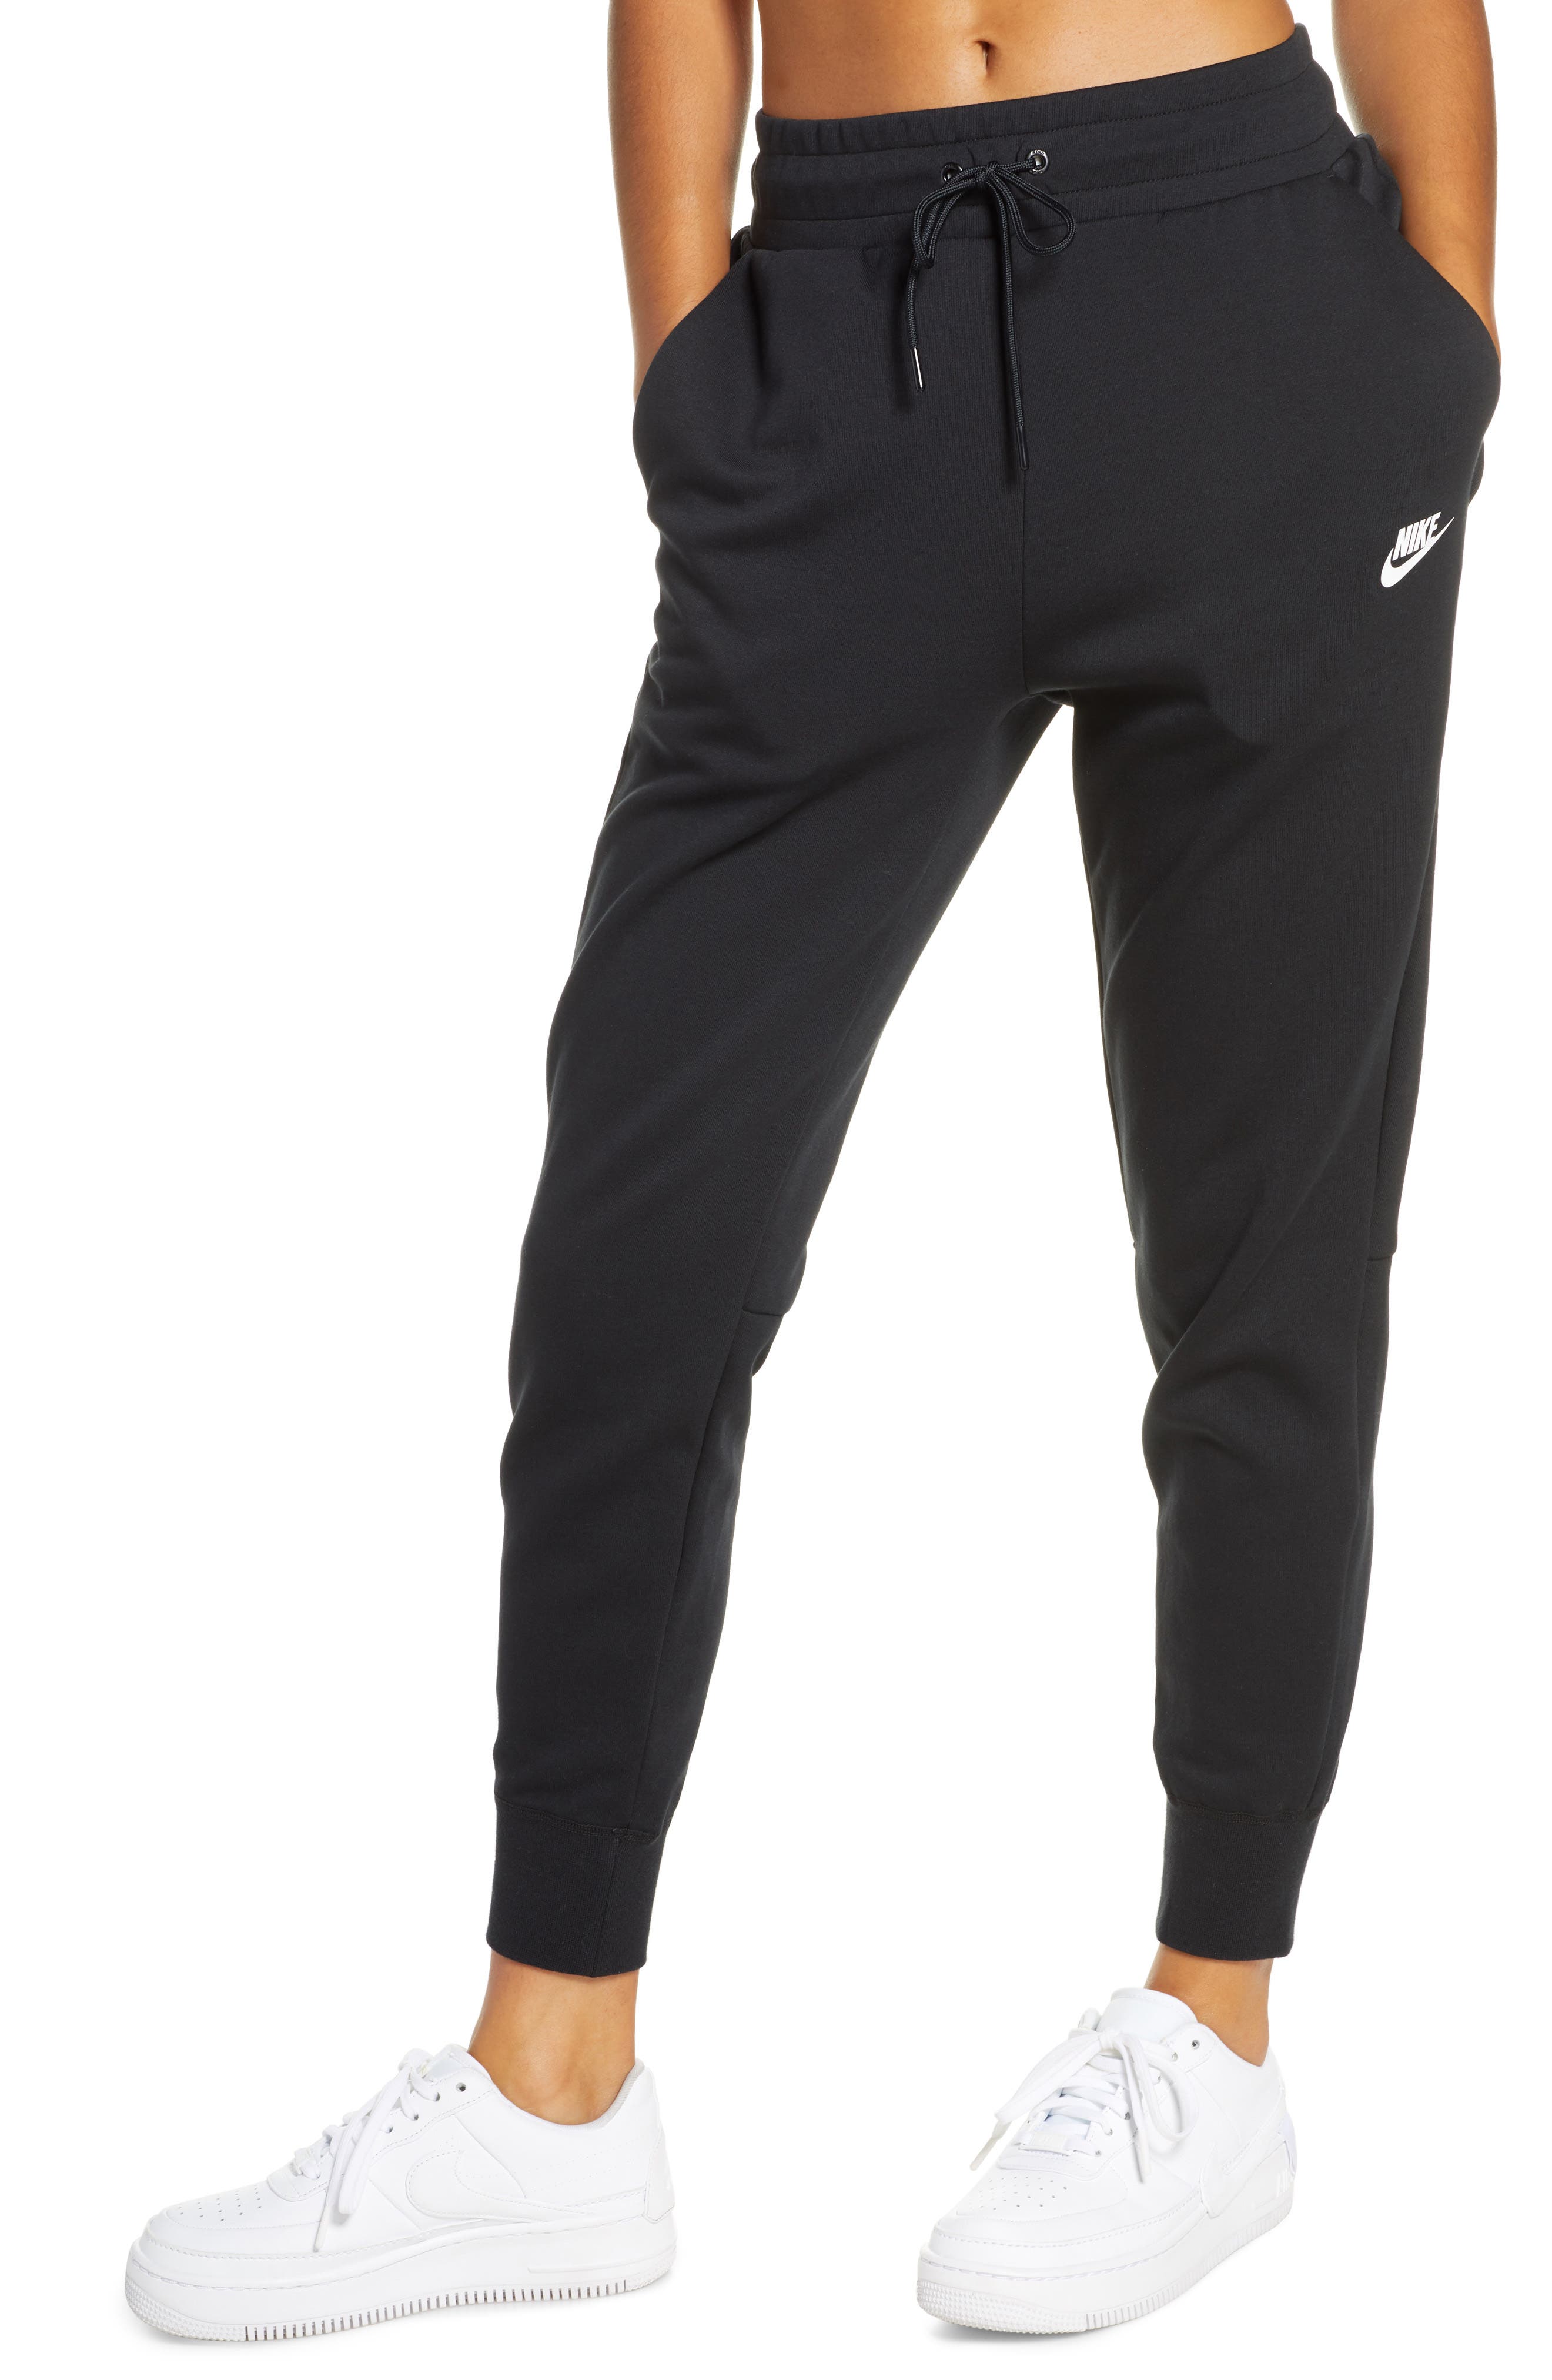 nordstrom nike joggers